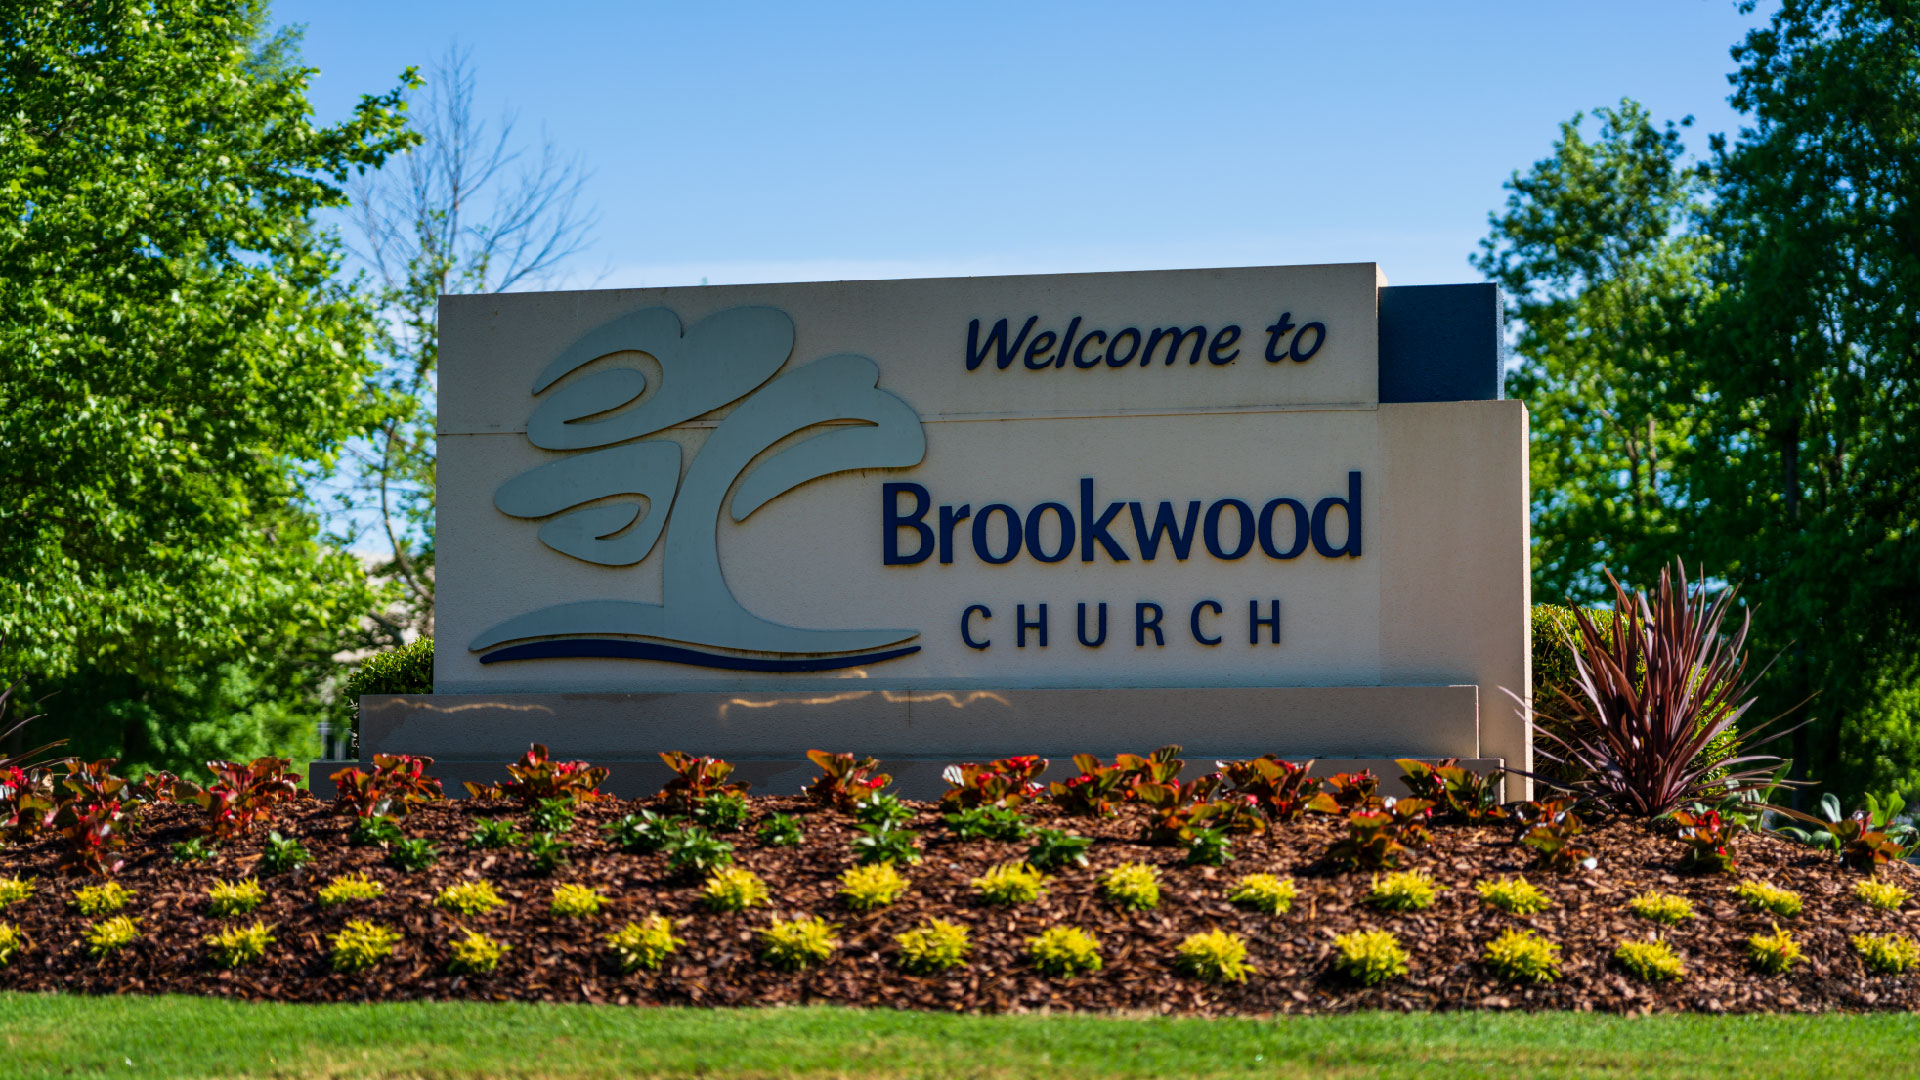 The sign at the front of the Brookwood Church property